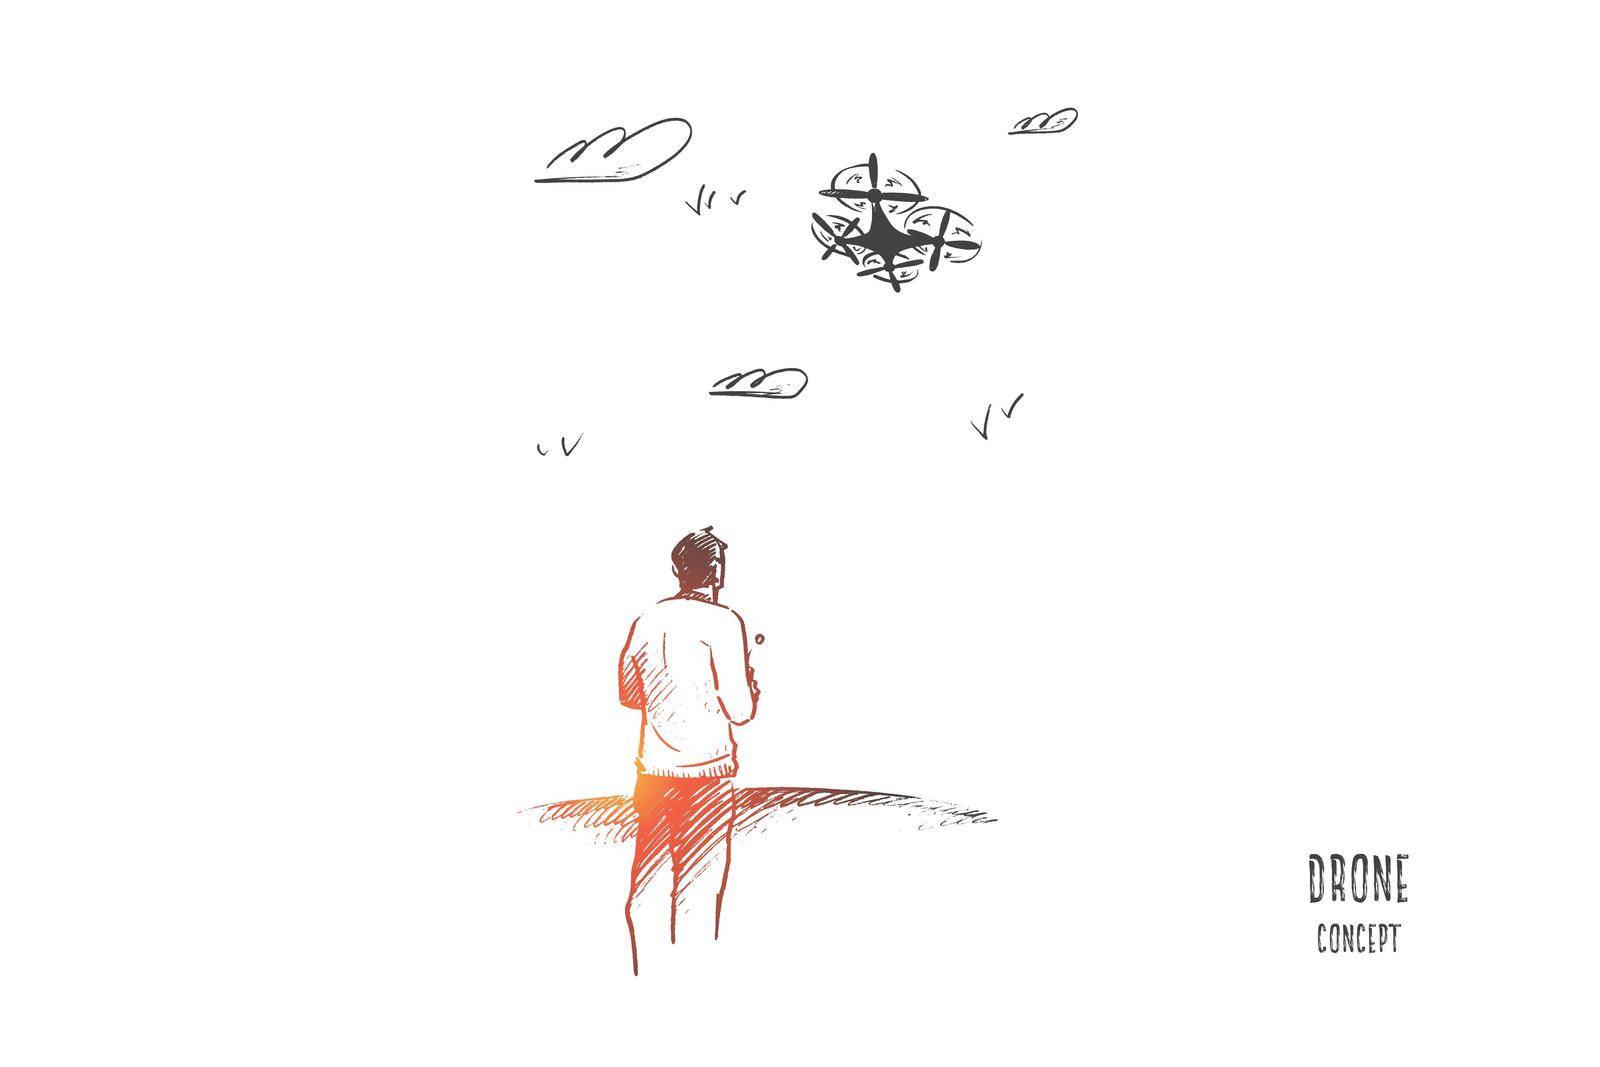 Drone concept. Hand drawn man with remote control and drone outdoor. Person flying drone with remote control isolated vector illustration.